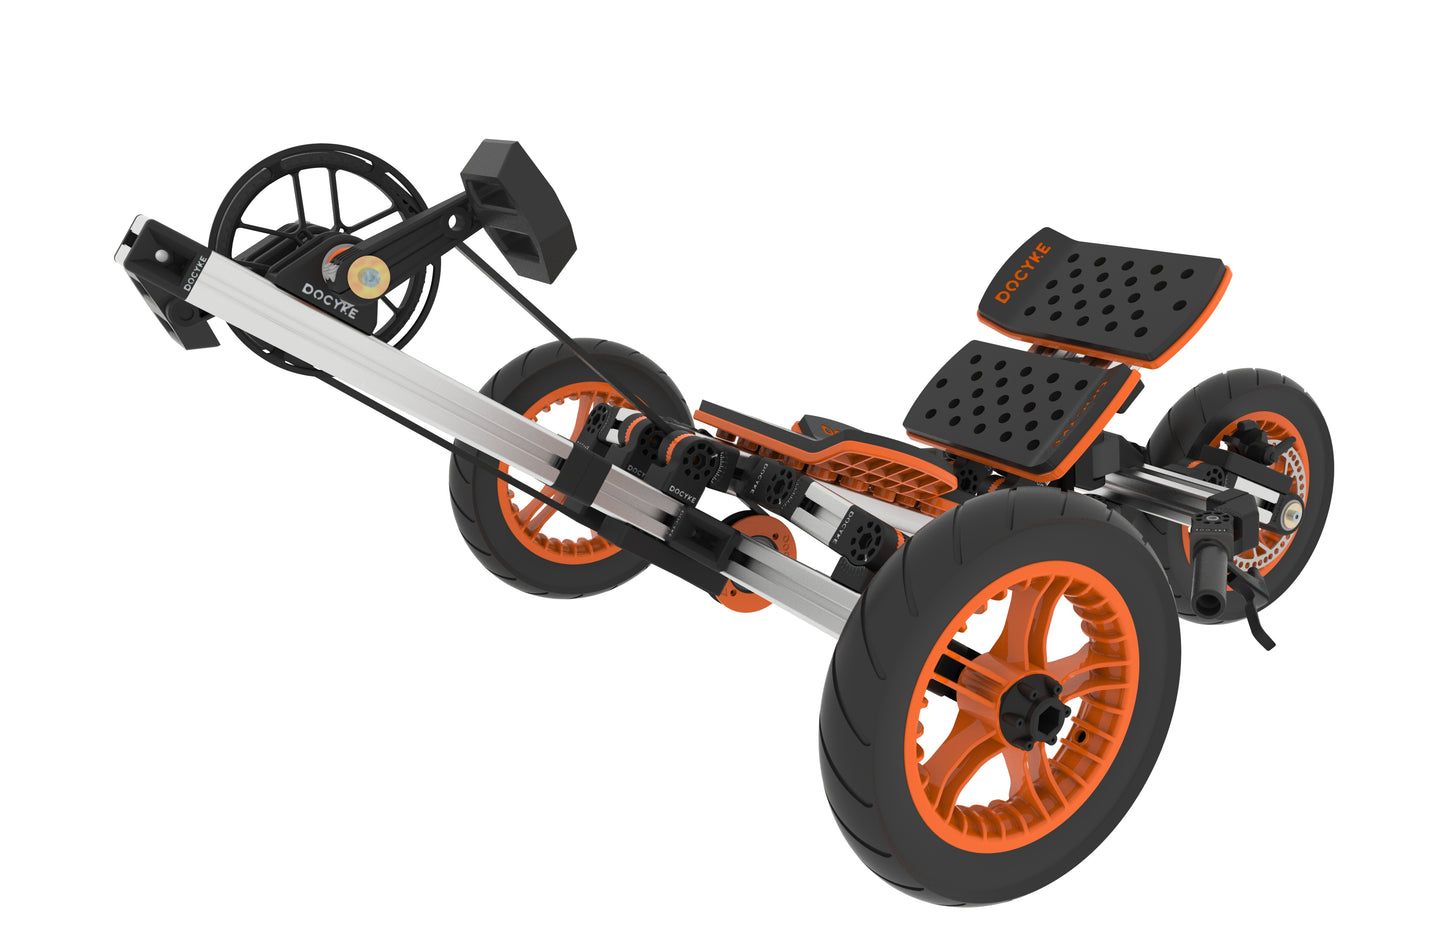 Buildable Kit 20 in 1 Kids Go Kart Set, Suitable for 1 to 8 Years Old, Two Wheel Bike, Three Wheel Bike